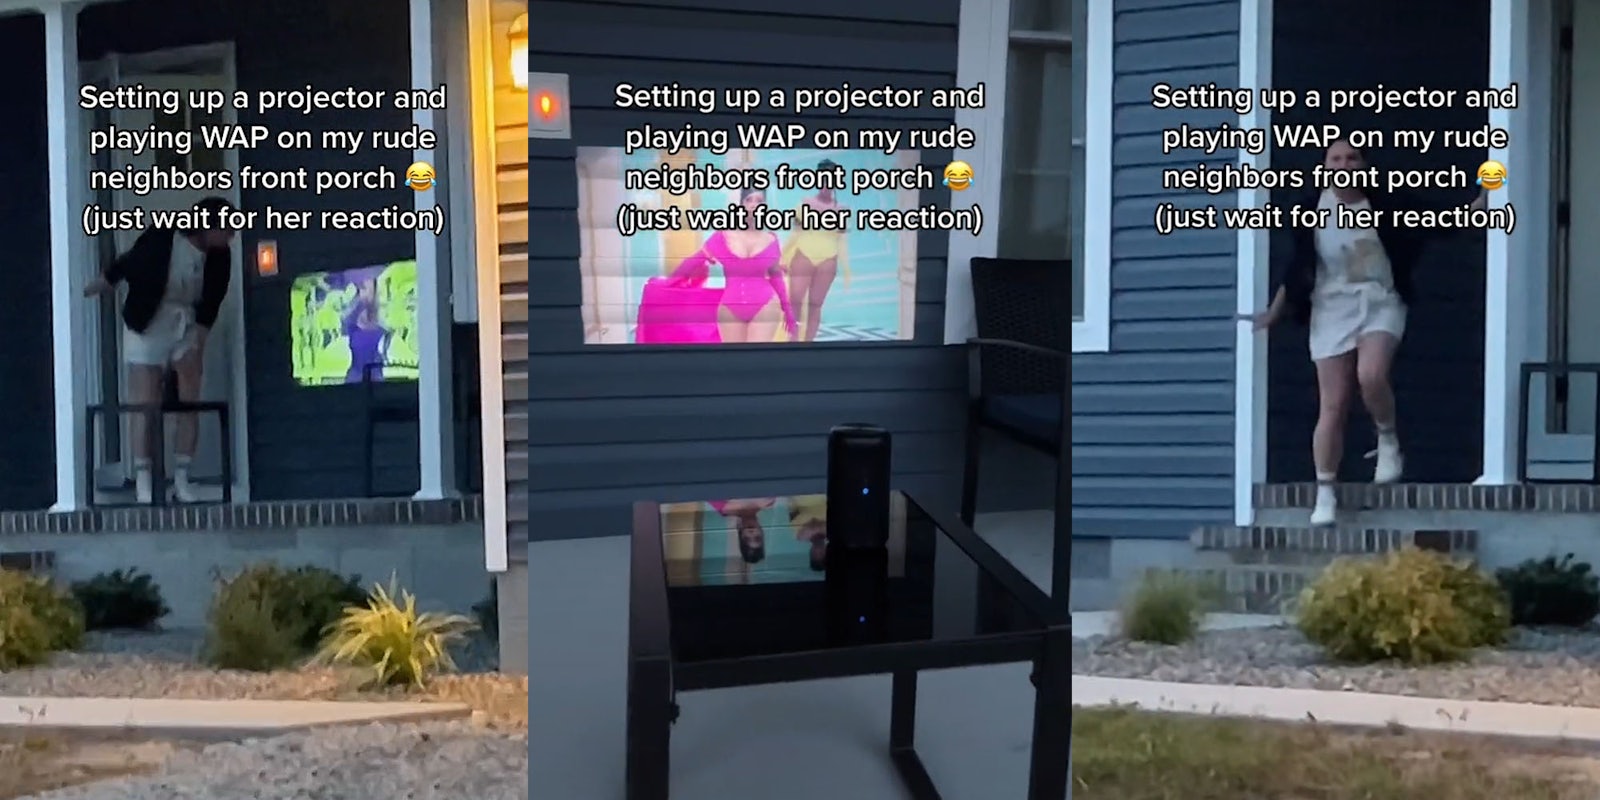 Neighbor spotting WAP projected on house caption 'Setting up a projector and playing WAP on my rude neighbors front porch (just wait for her reaction)' (l) Neighbor's porch with Cardi B WAP projected on wall table with projector set up caption 'Setting up a projector and playing WAP on my rude neighbors front porch (just wait for her reaction)' (c) Neighbor coming down steps angry caption 'Setting up a projector and playing WAP on my rude neighbors front porch (just wait for her reaction)' (r)